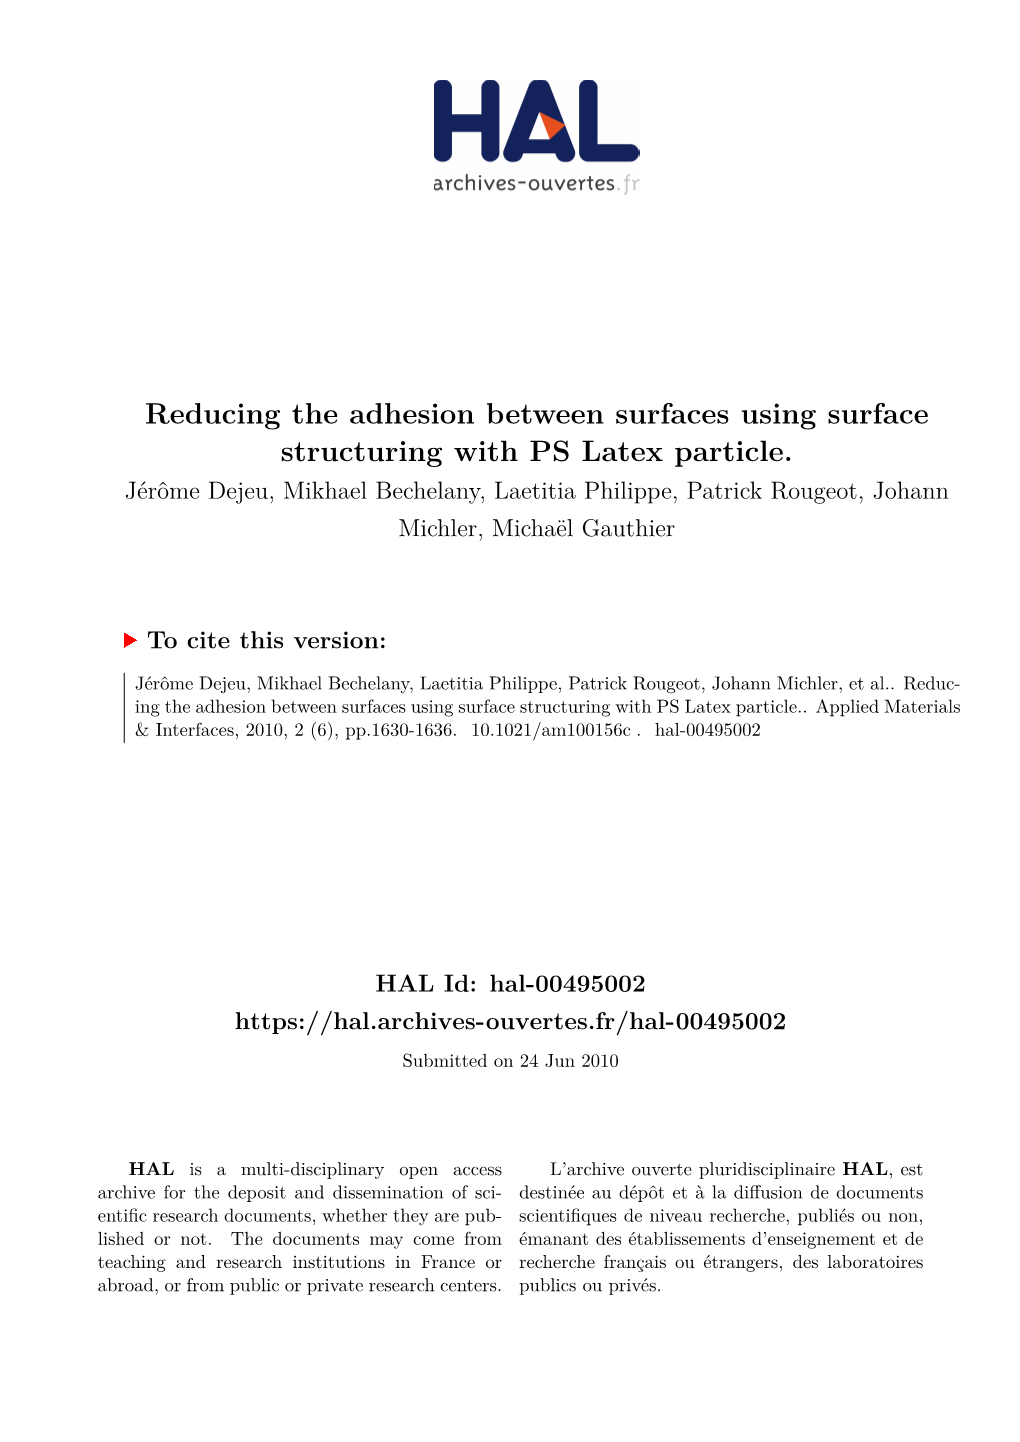 Reducing the Adhesion Between Surfaces Using Surface Structuring with PS Latex Particle